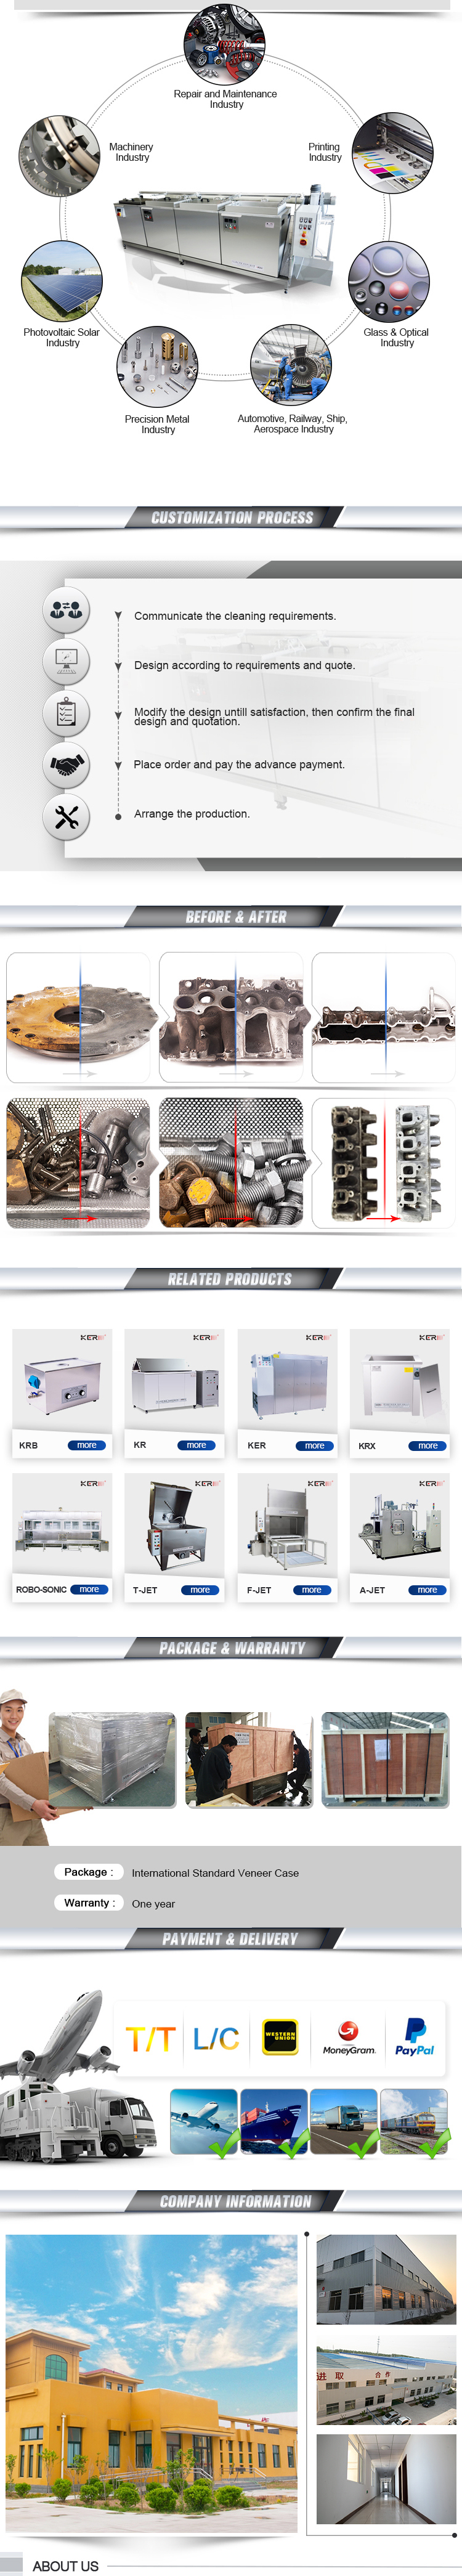 Multi-Stage Industrial Ultrasonic Degreaser for Parts Cleaning Washing